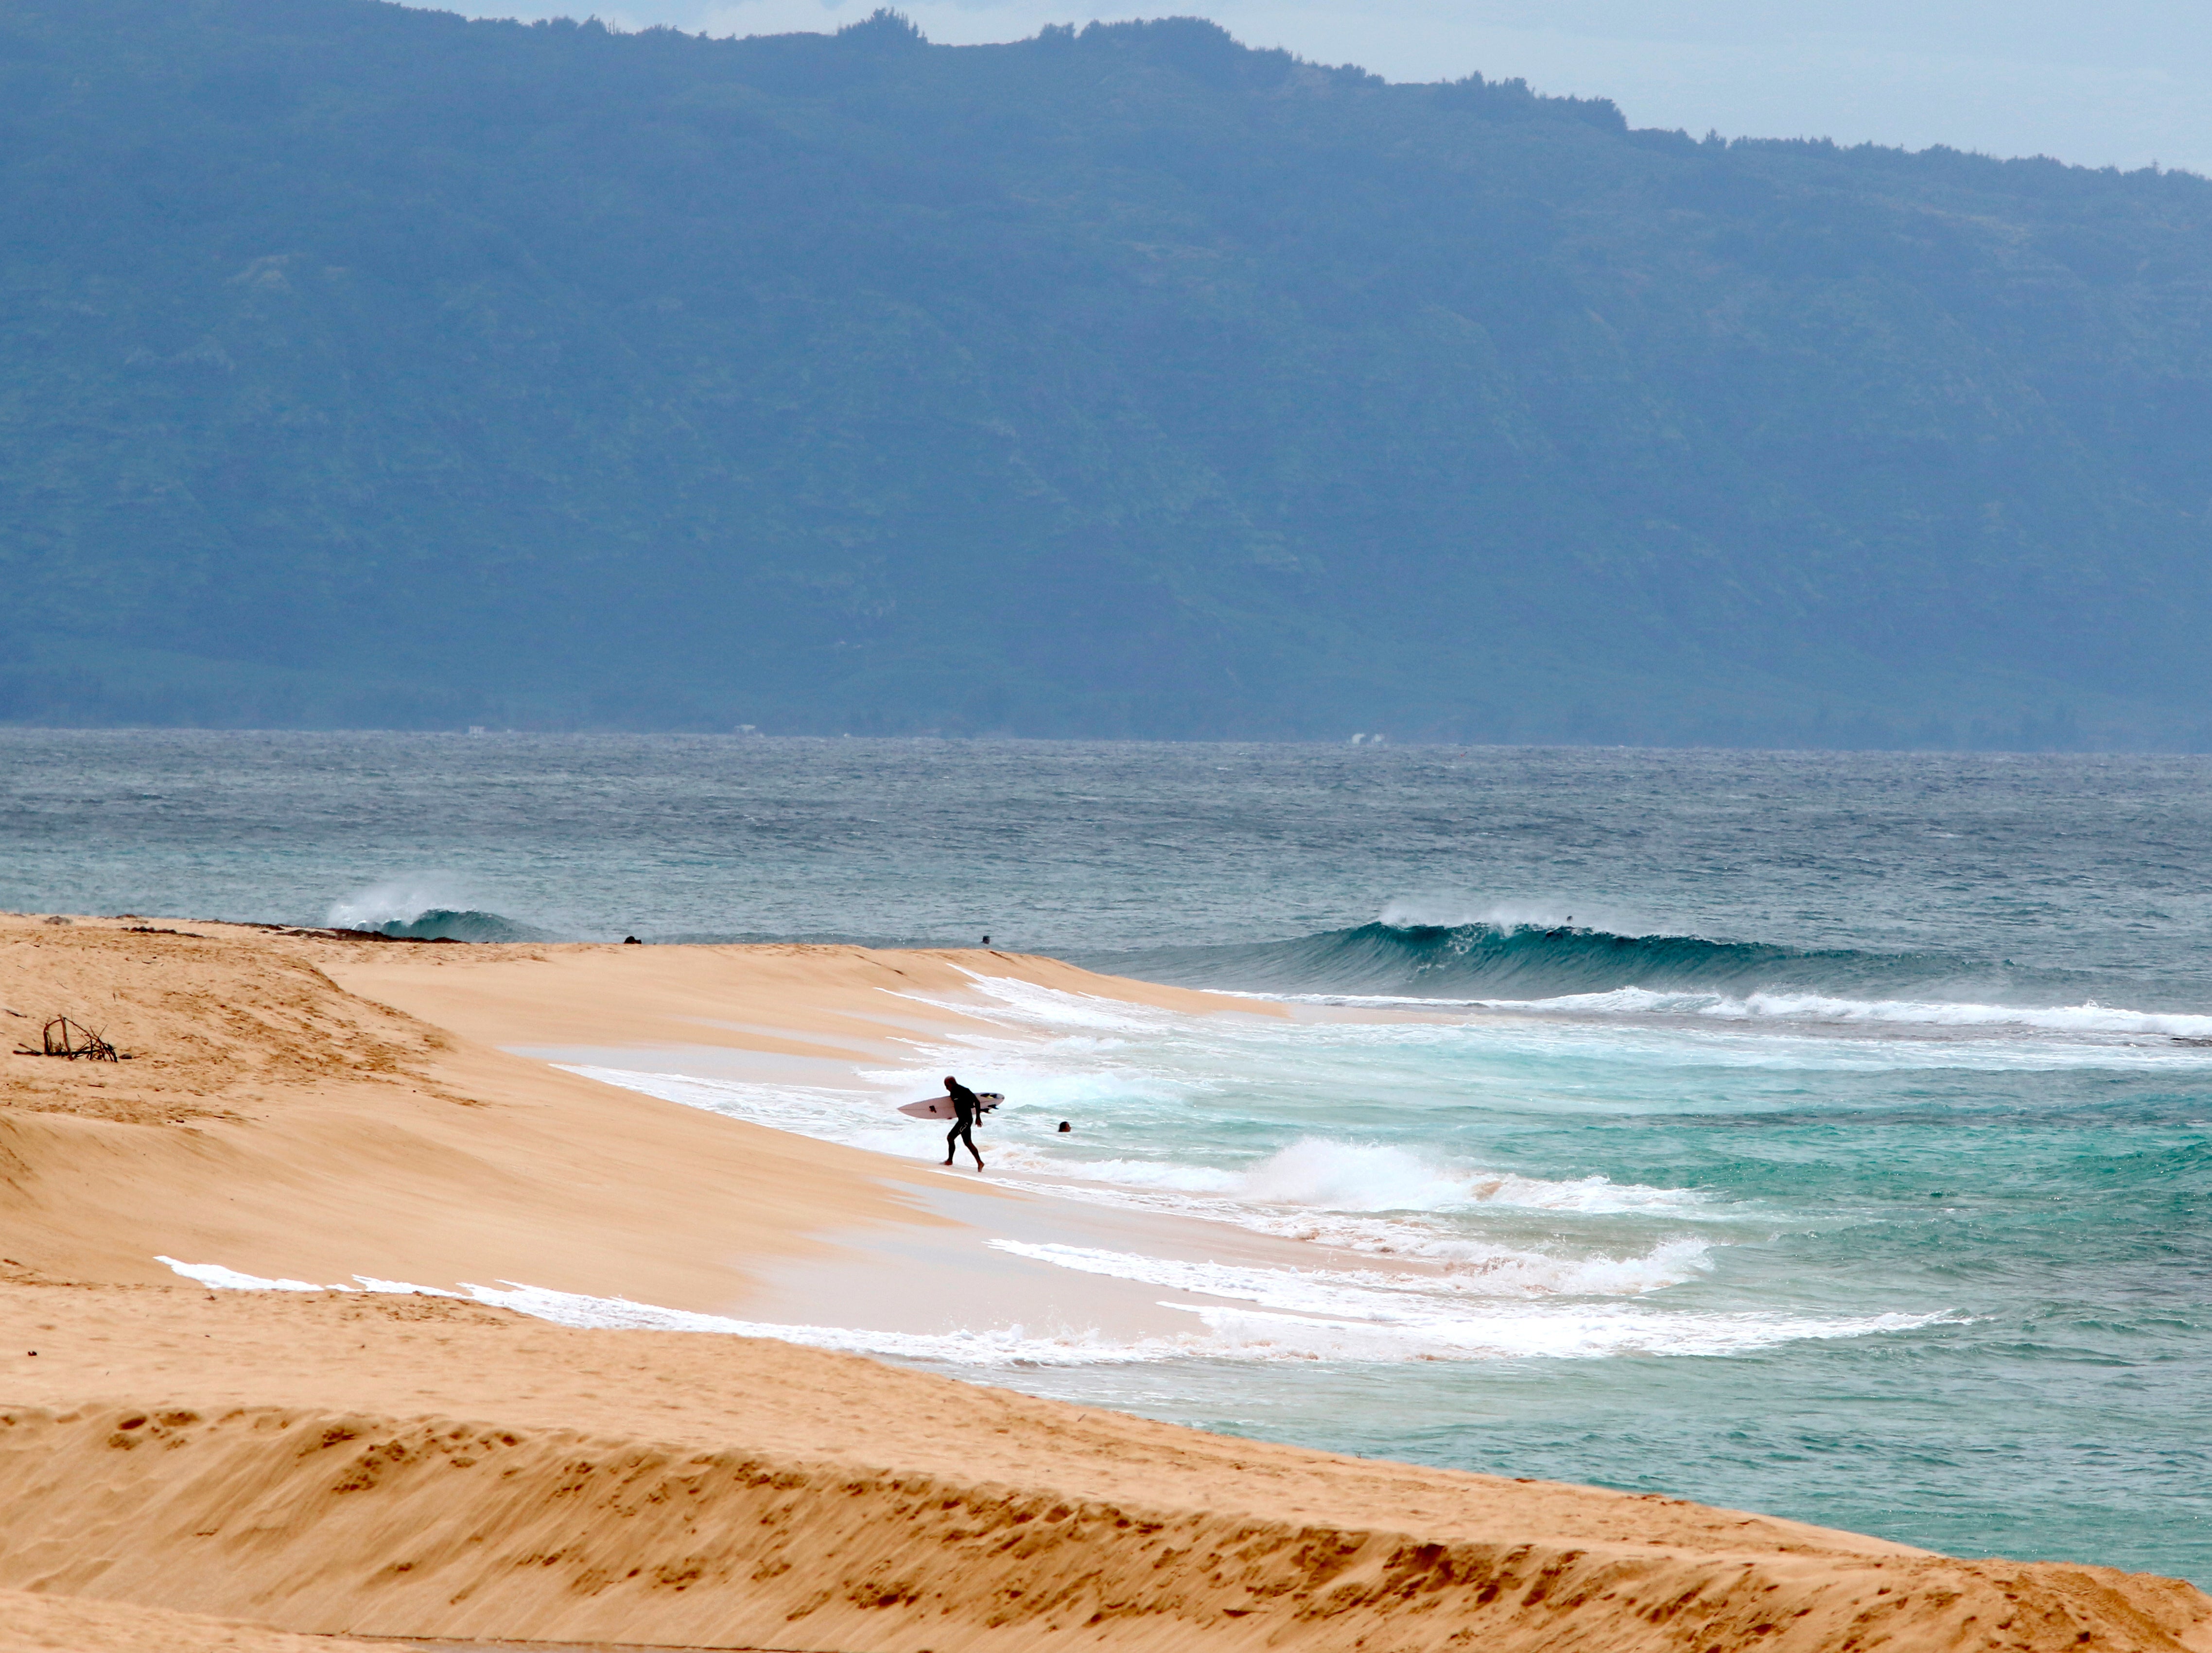 Stock image of a surfer walking out of the ocean on Oahu's North Shore near Haleiwa